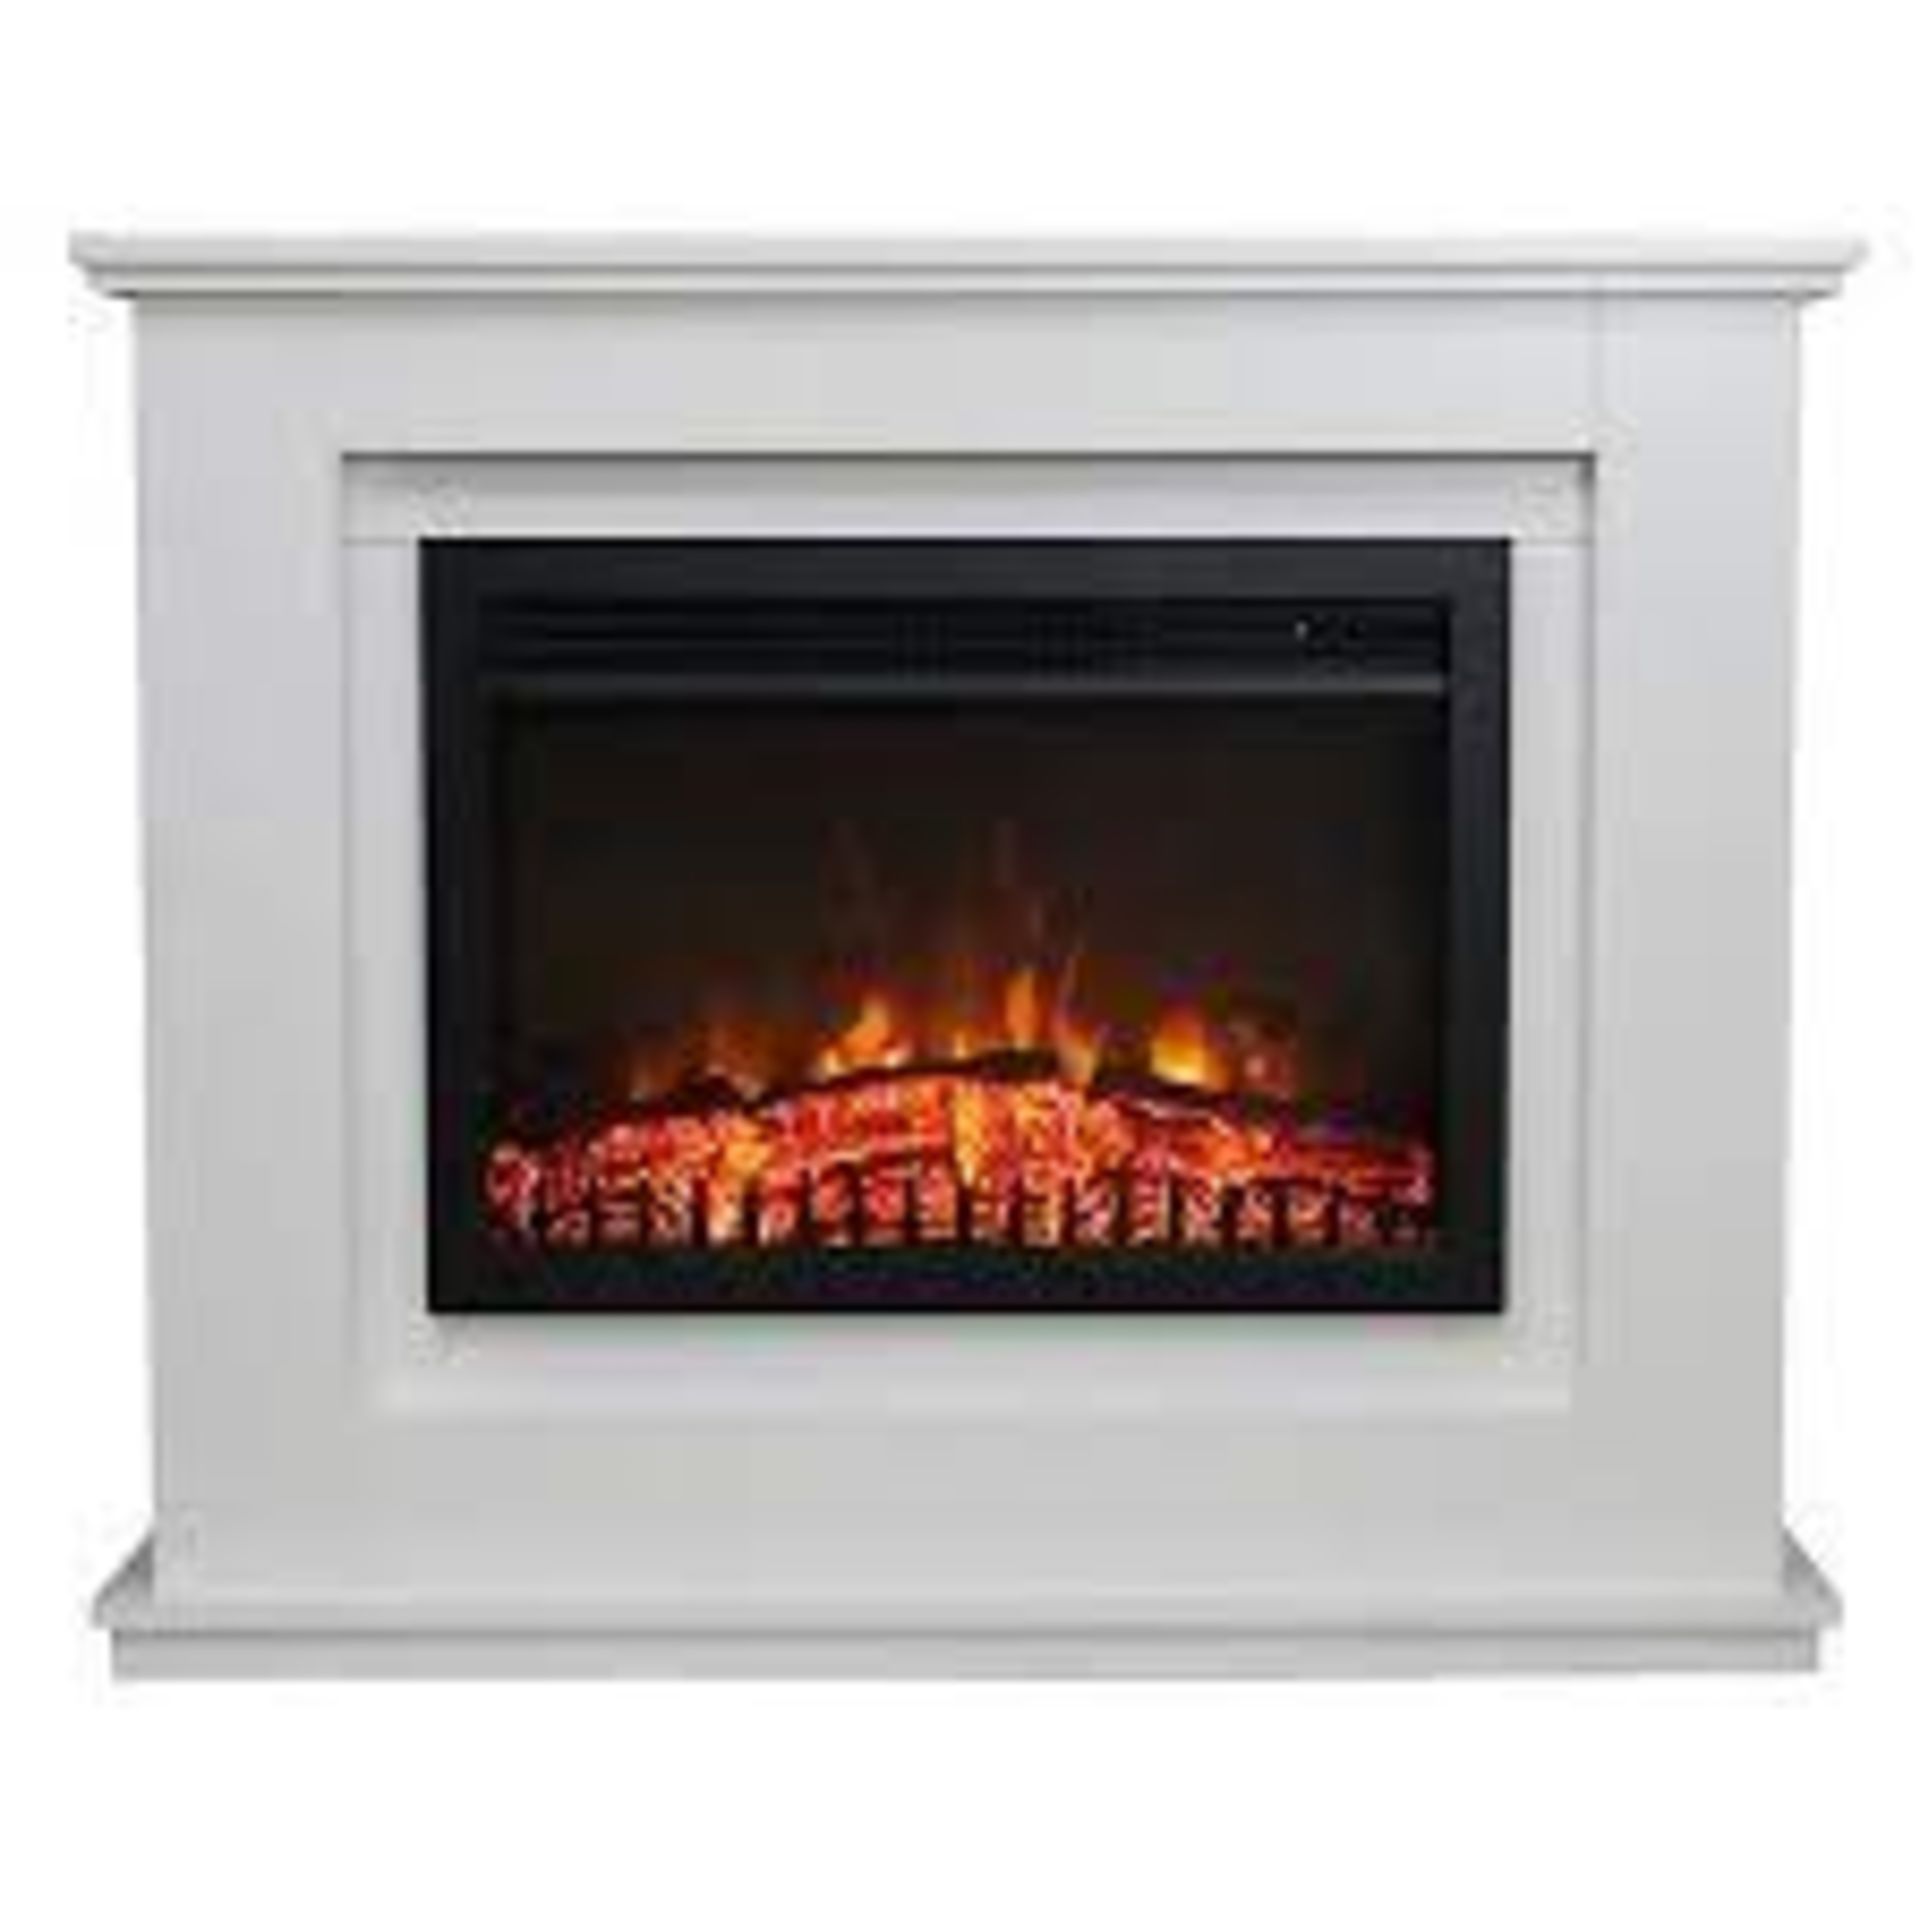 Focal Point Medford White Electric Fire Suite. - R14.11. The Focal Point Medford LED Electric